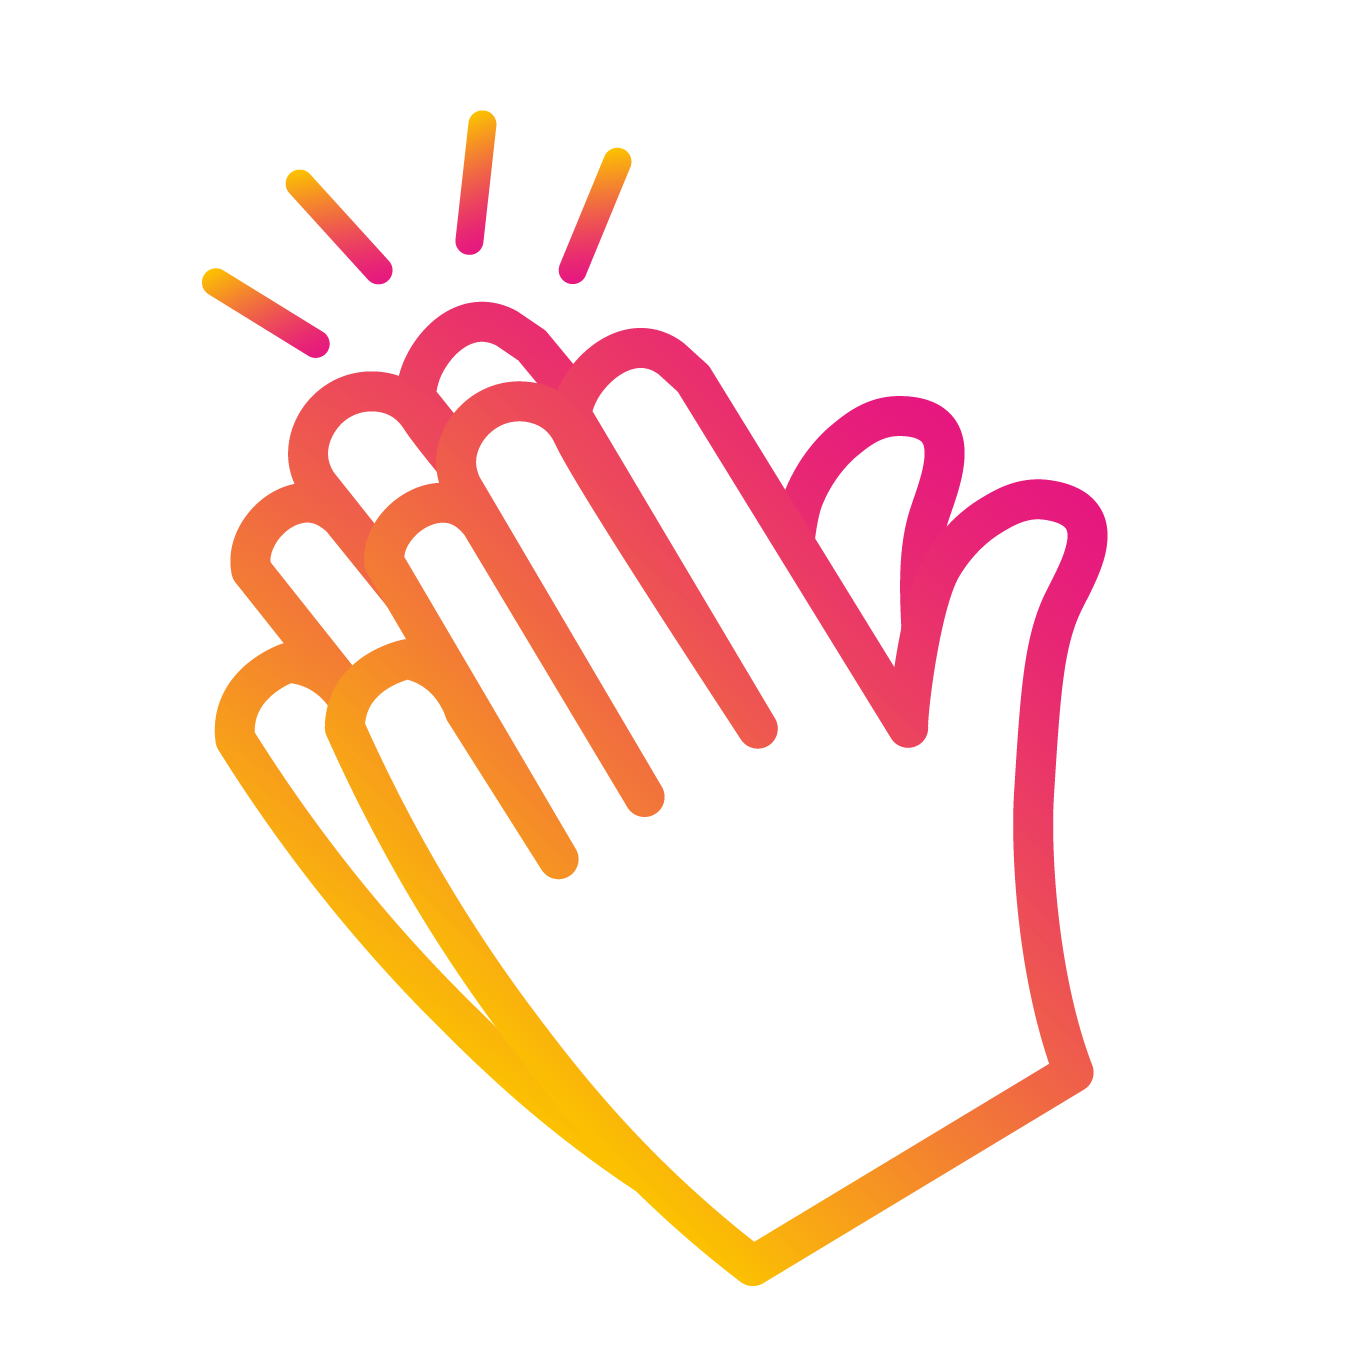 clapping hands icons